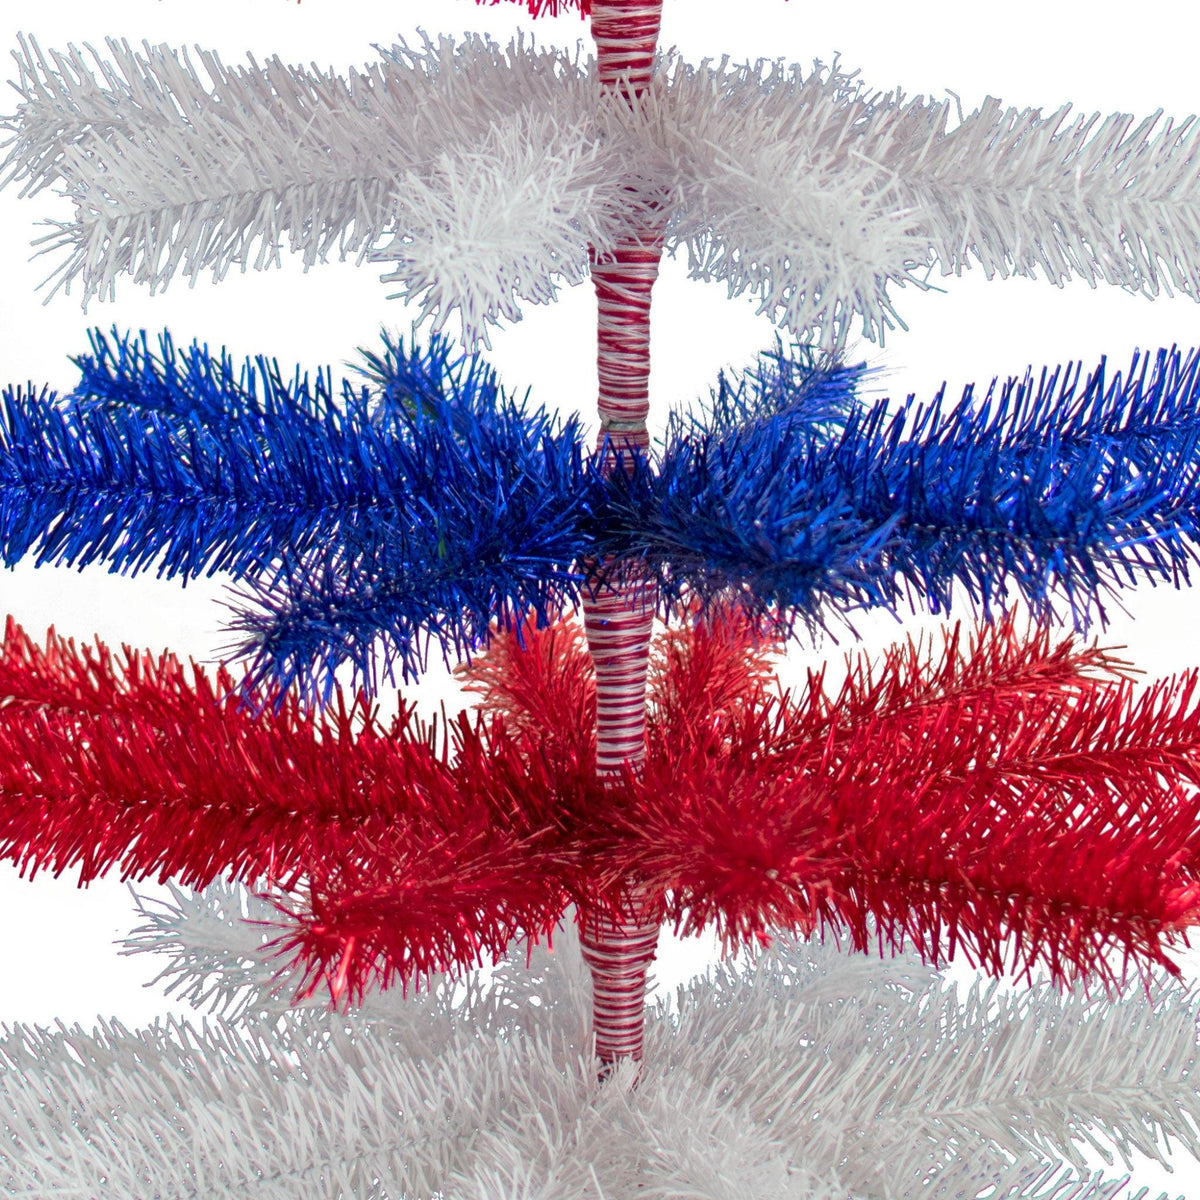 60in tall Red, White, and Blue Layered Tinsel Christmas Trees made by hand in the USA.  Decorate for the holidays with retro 4th of July-themed Trees and start creating your centerpiece now.  Shop for more at leedisplay.com